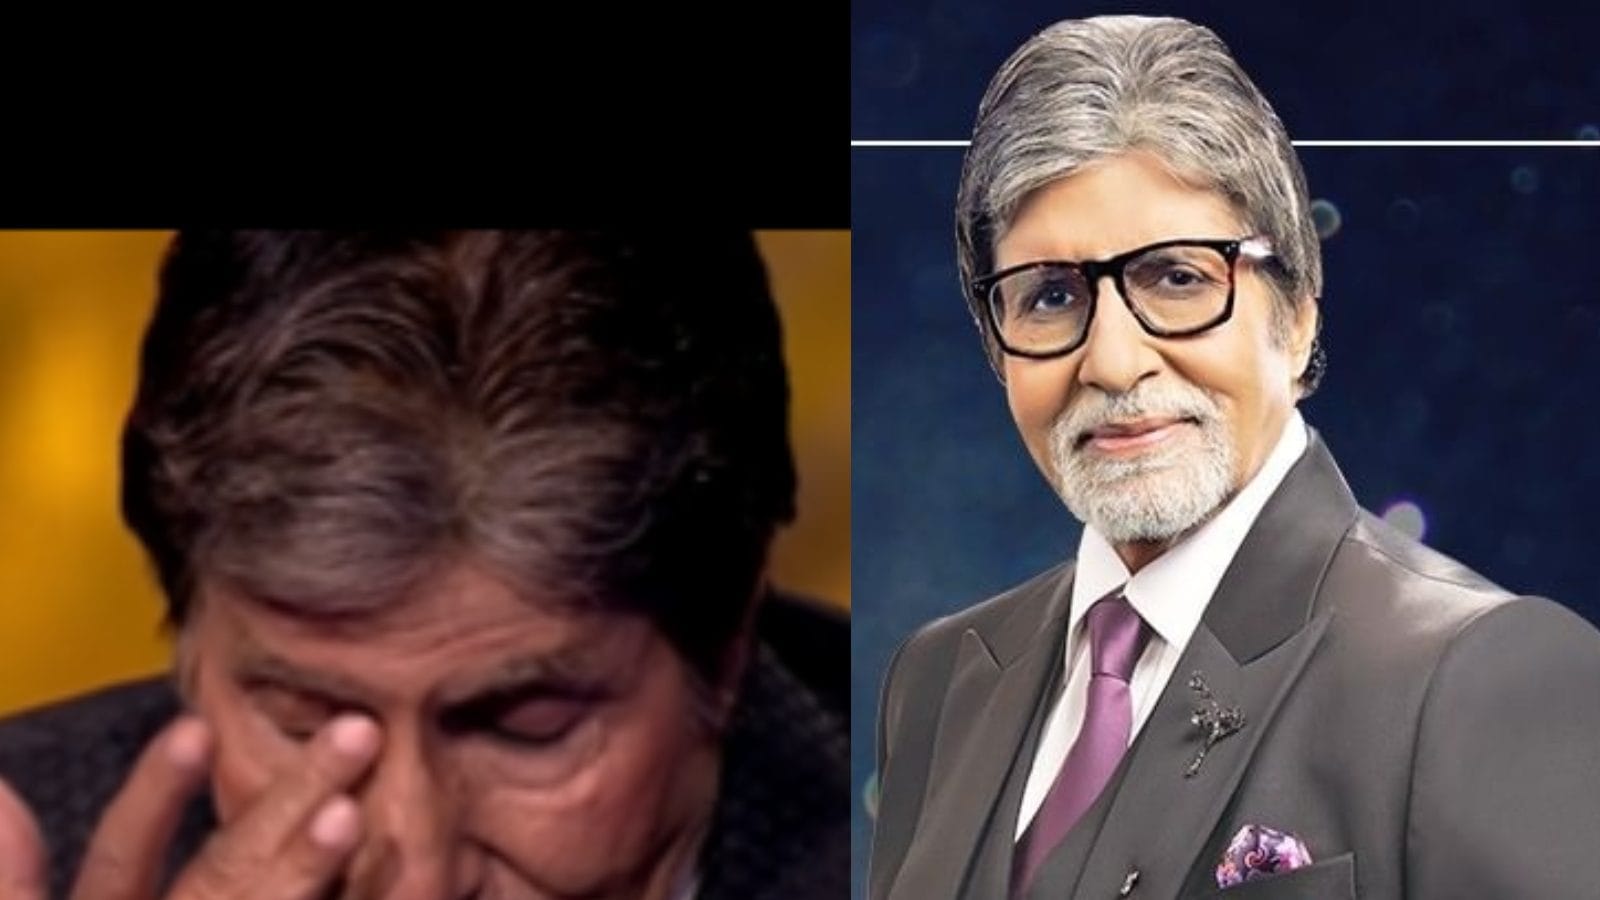 Amitabh Bachchan in Tears, Says He Was Forced to Host KBC in 2000: 'Film Mein Kaam Mil Nai Raha Tha'